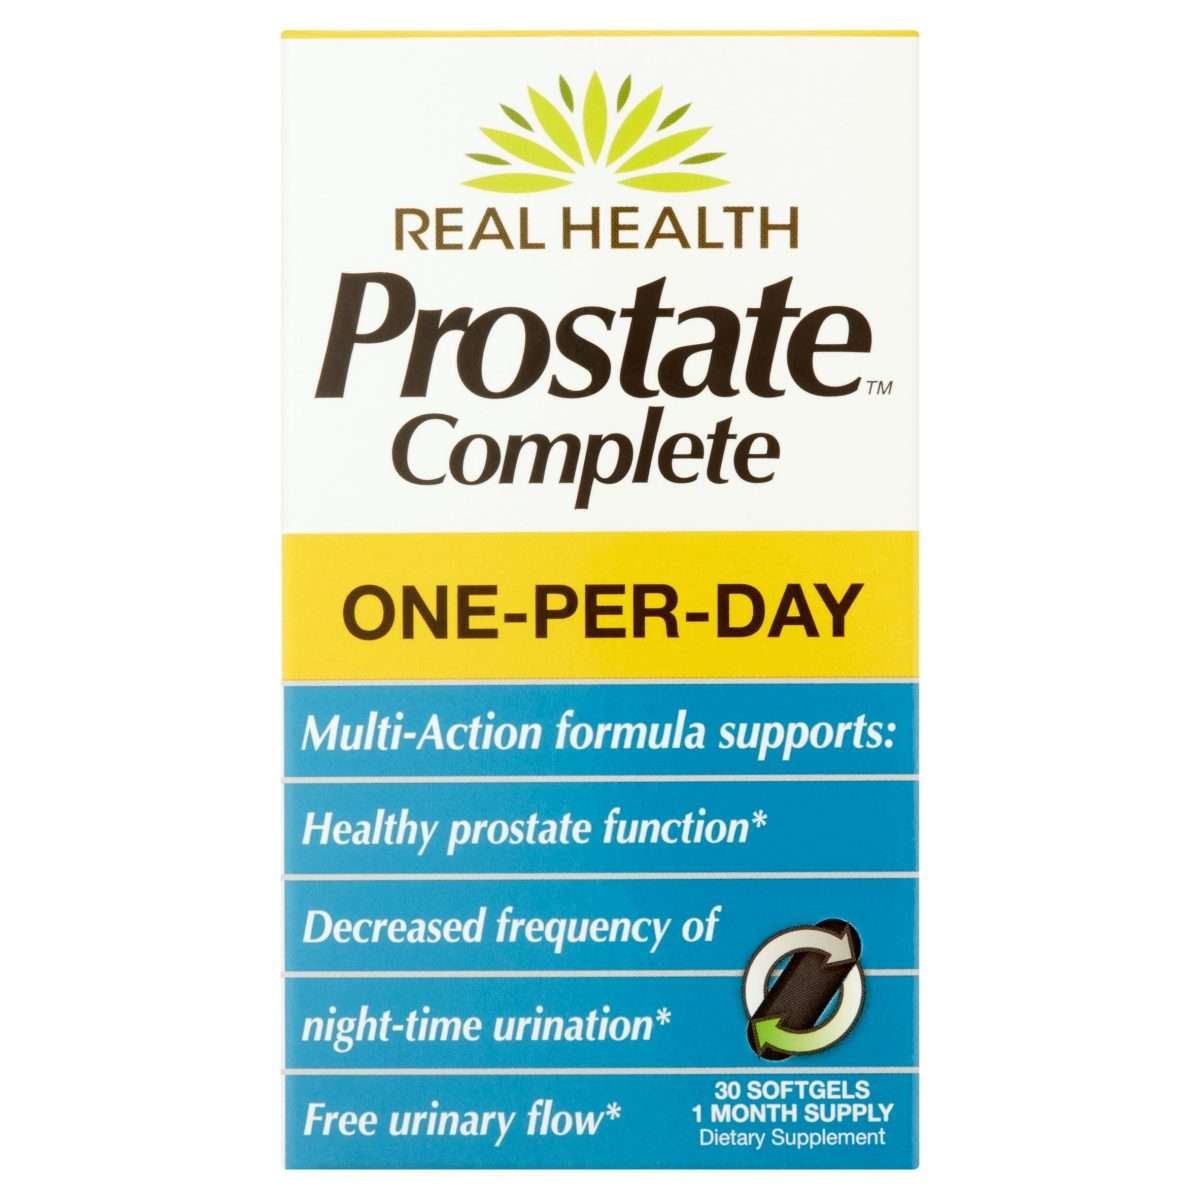 Real Health Laboratories Prostate Complete One